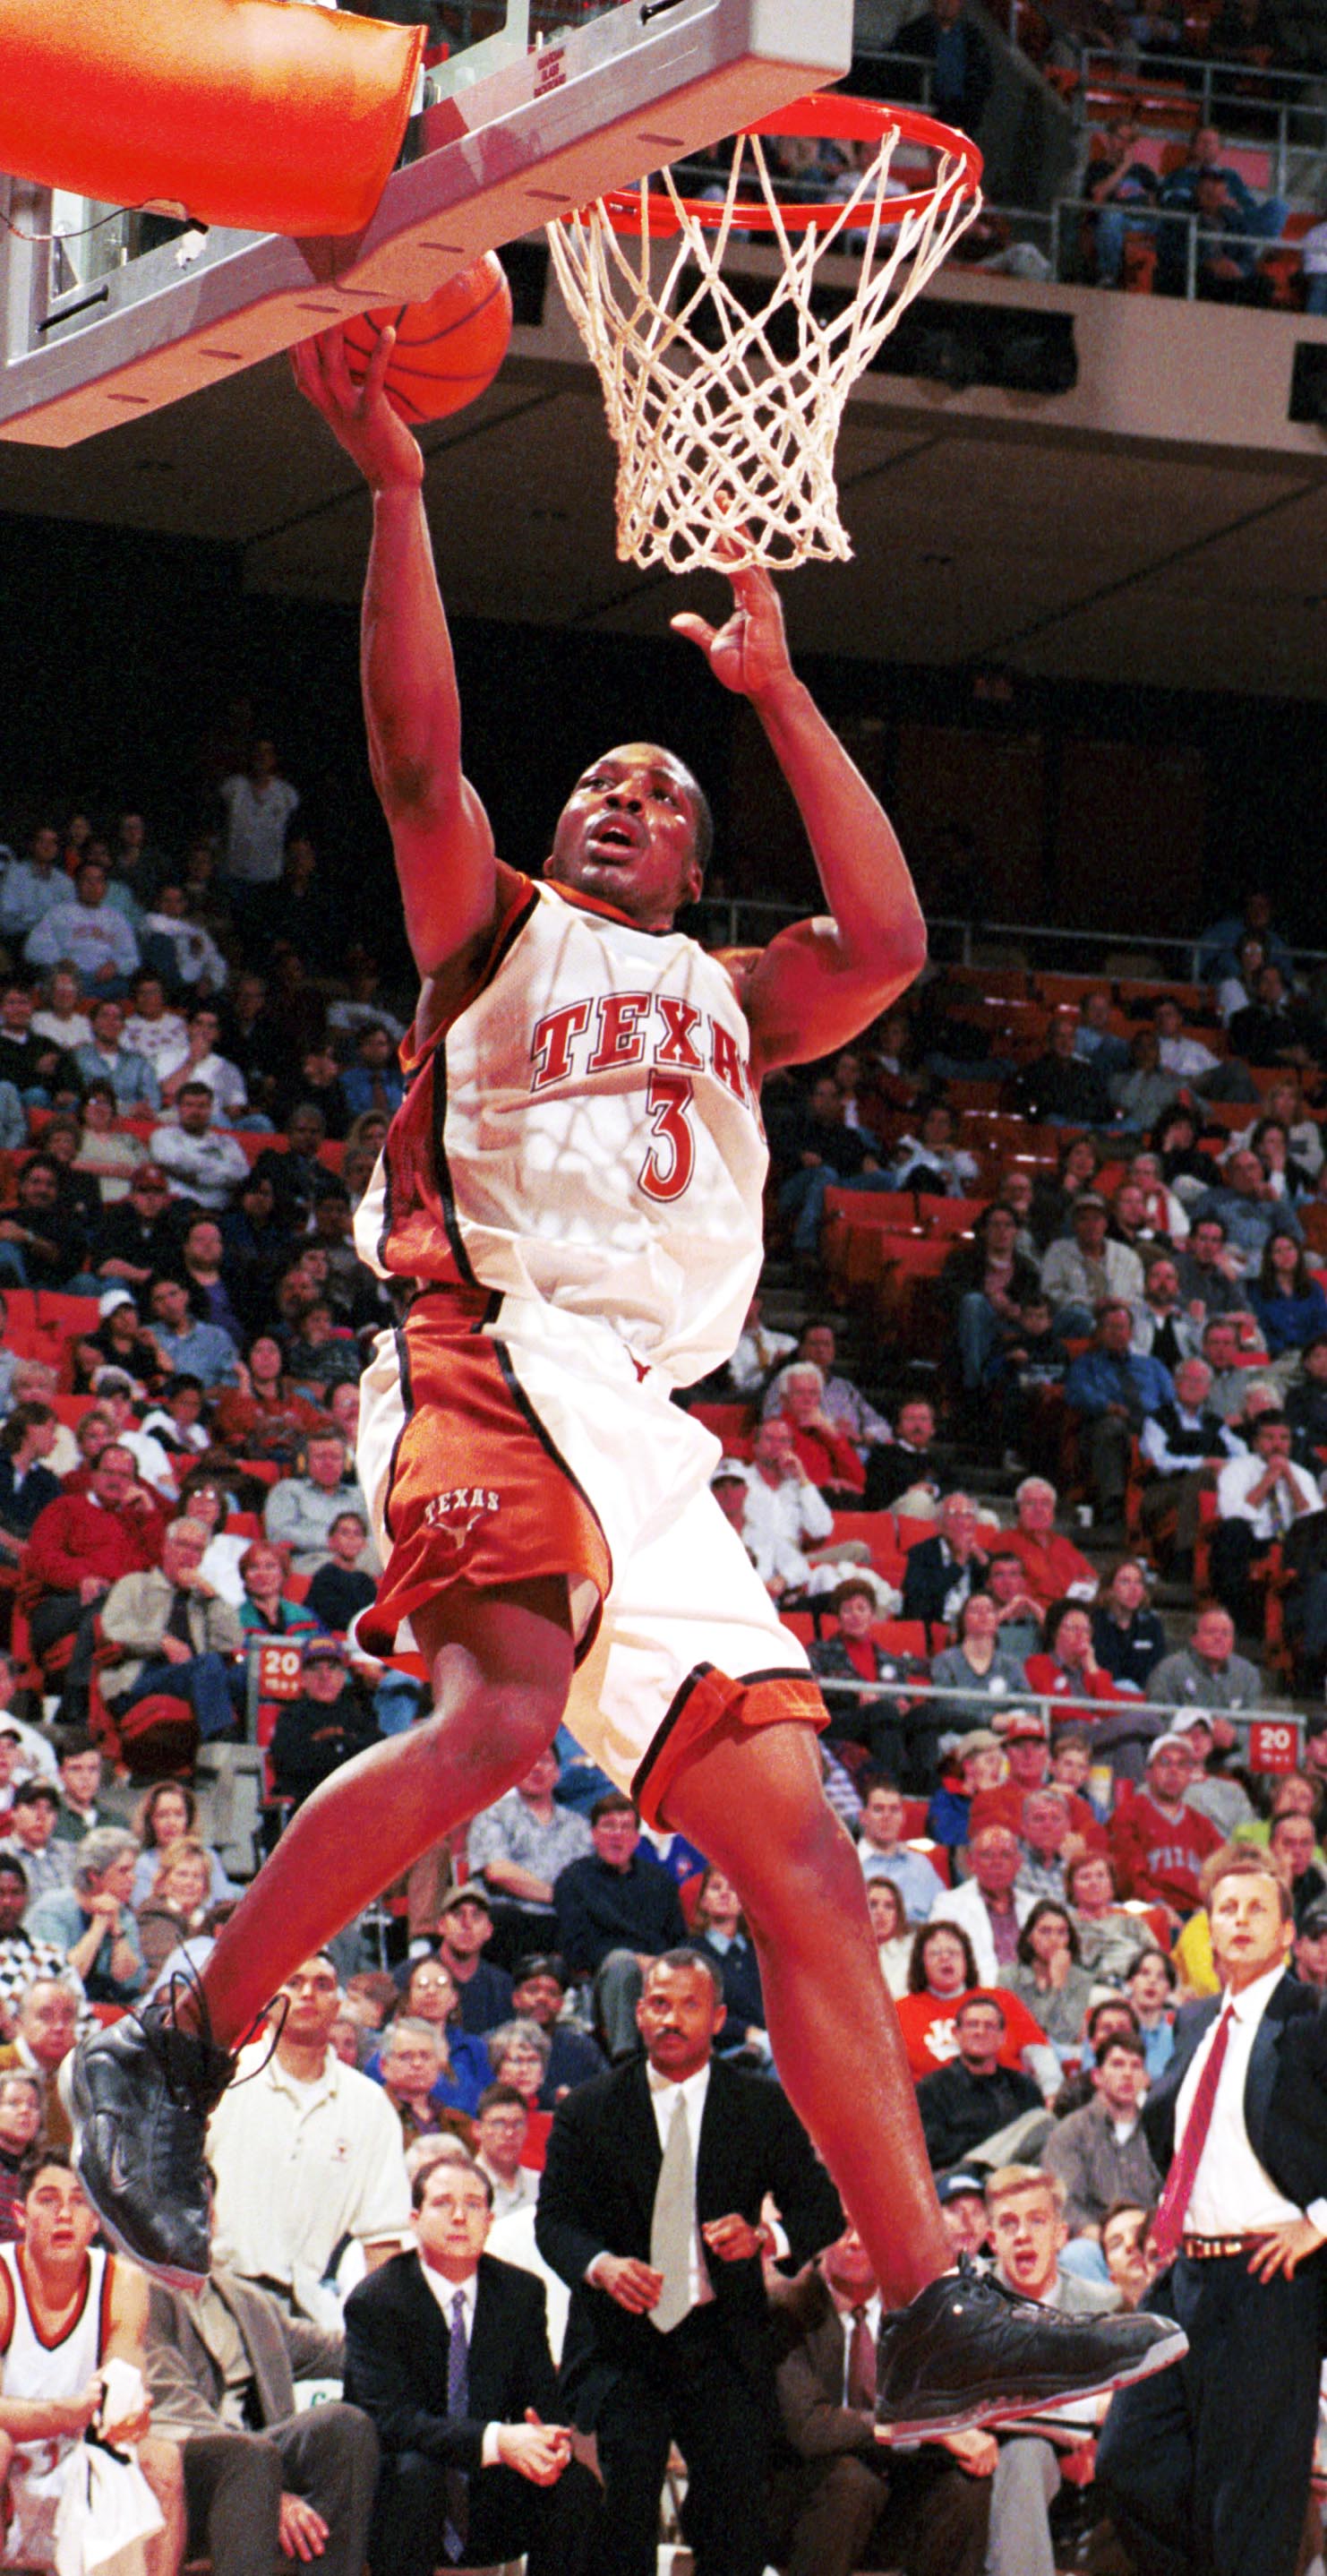 Muoneke jumps up to make a layup at a UT basketball game, crowd in the background